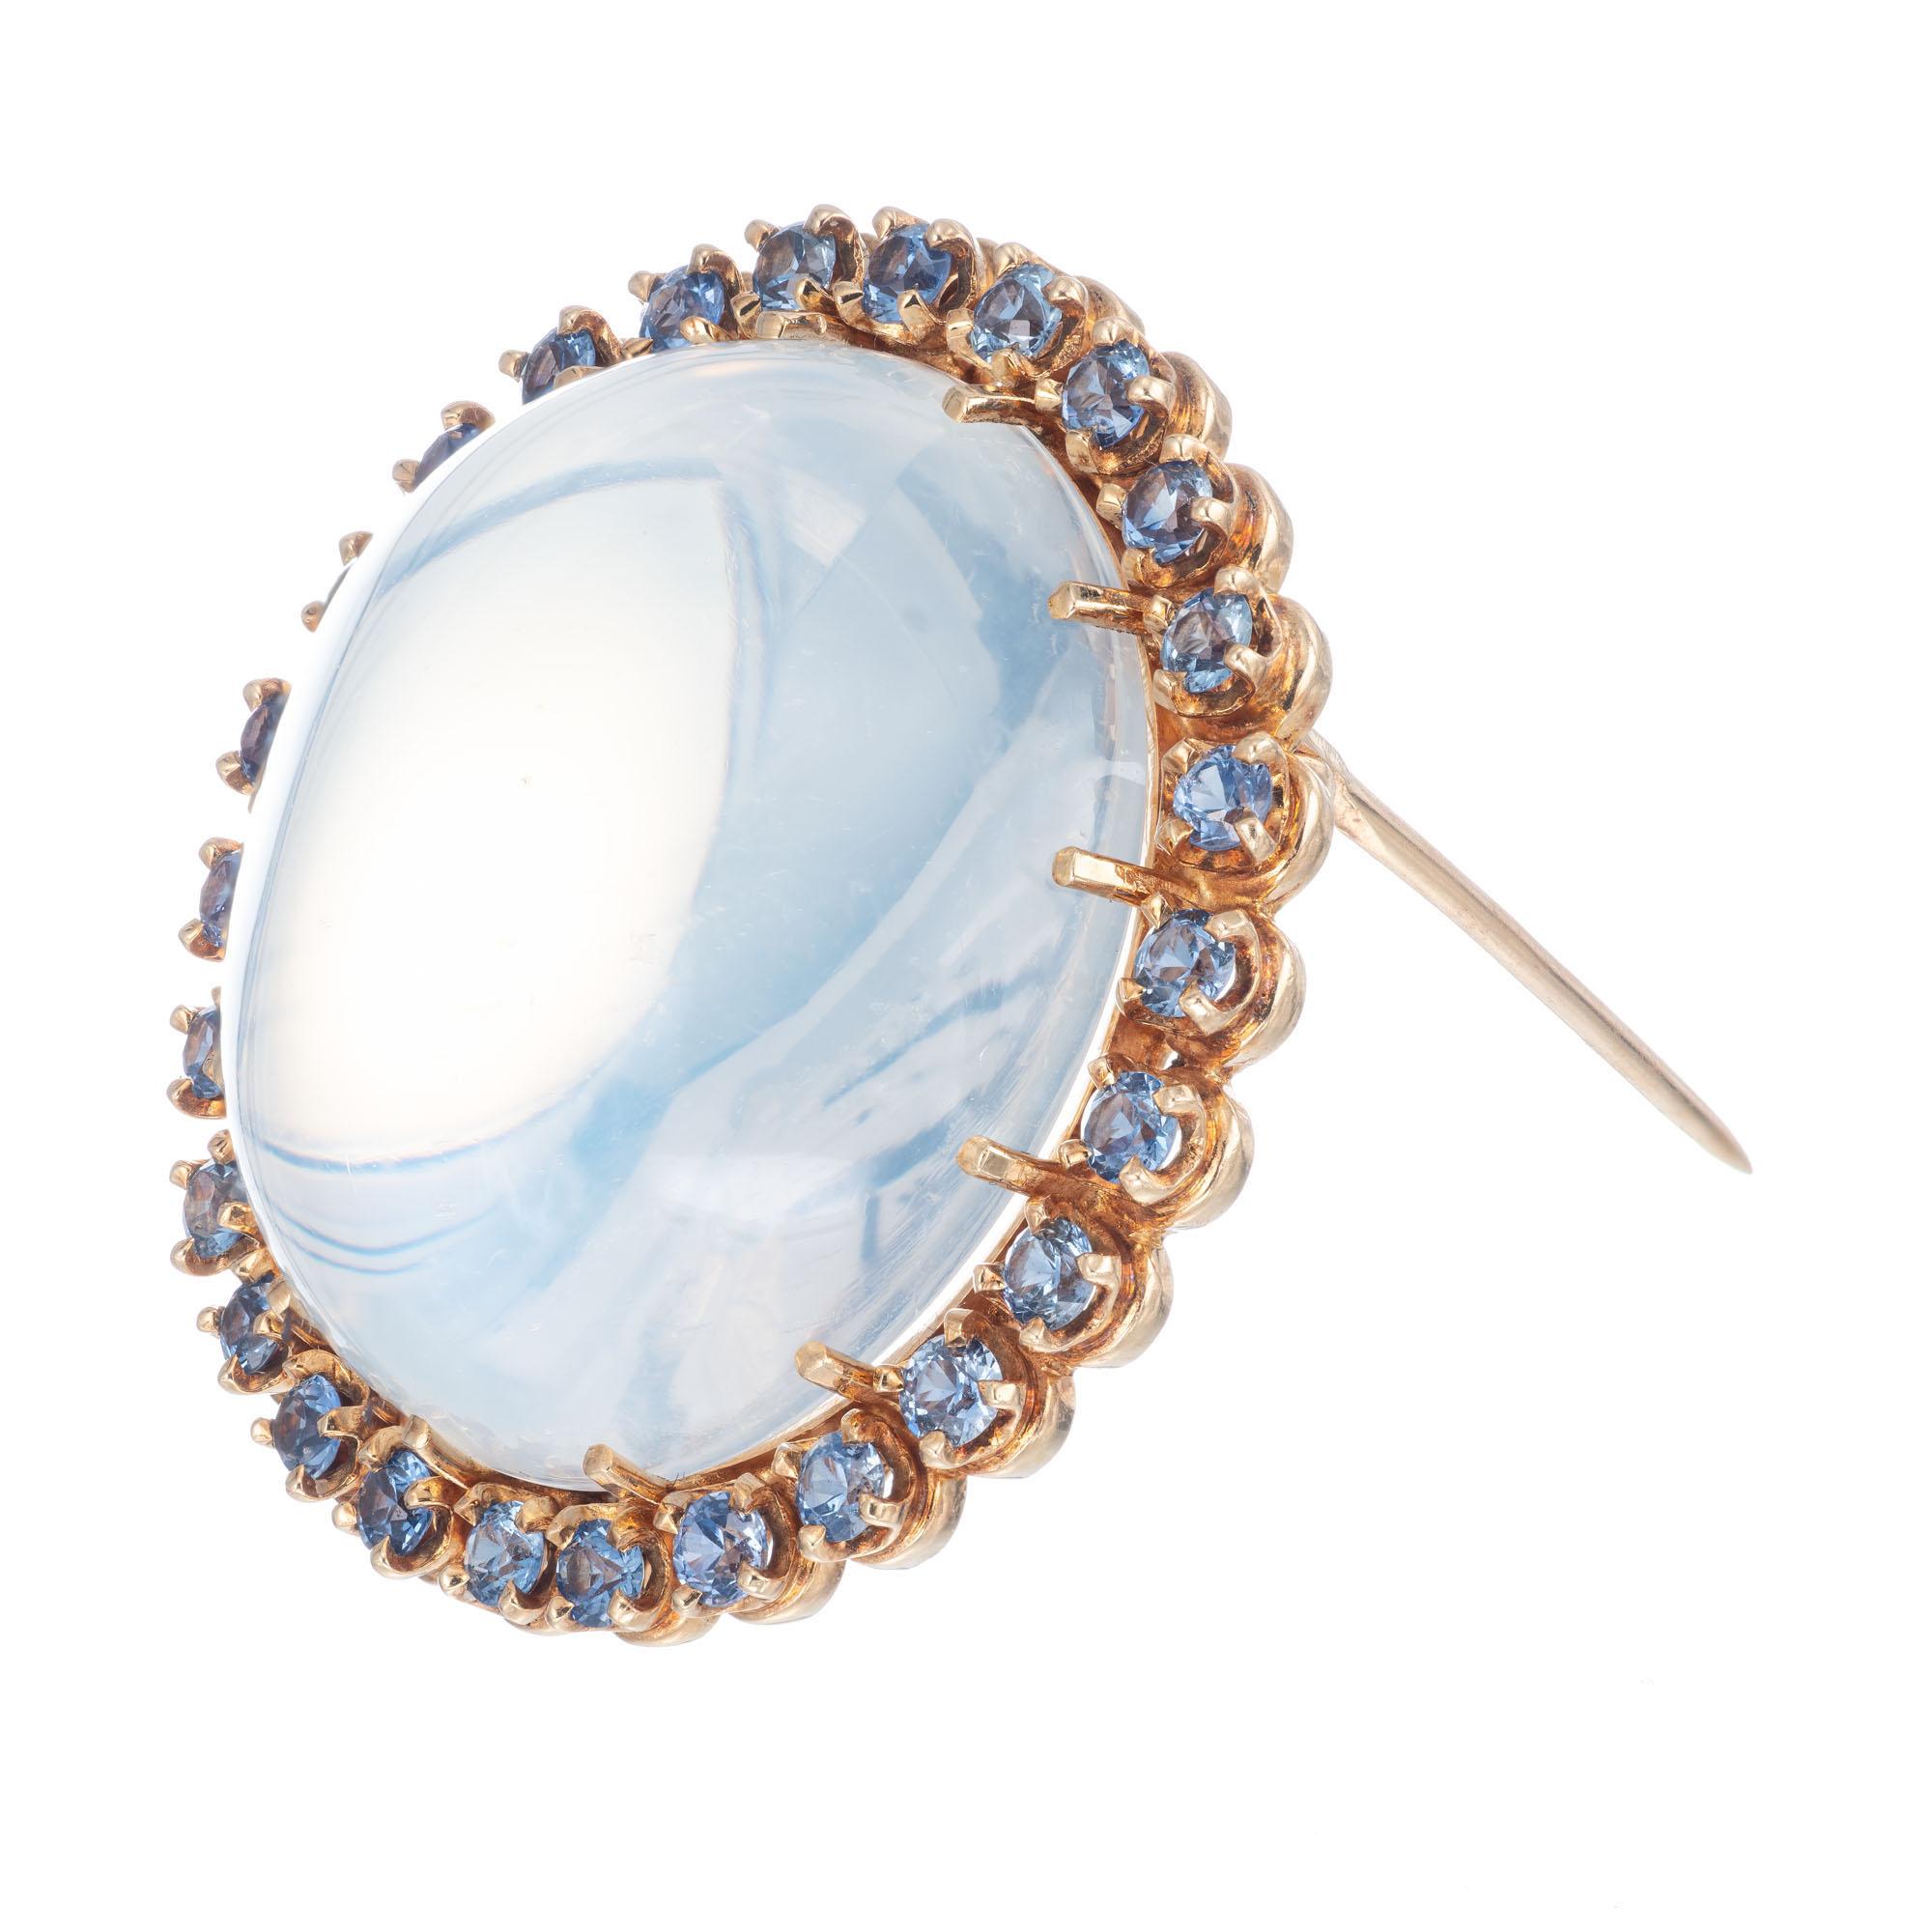 Tiffany & Co. Circa 1930's GIA certified moonstone with a halo of round violet sapphires in 14k yellow gold.

1 round double cabochon near colorless Moonstone SI, approx. 50.00cts GIA Certificate # 2205170421
26 round violet blue sapphires SI,